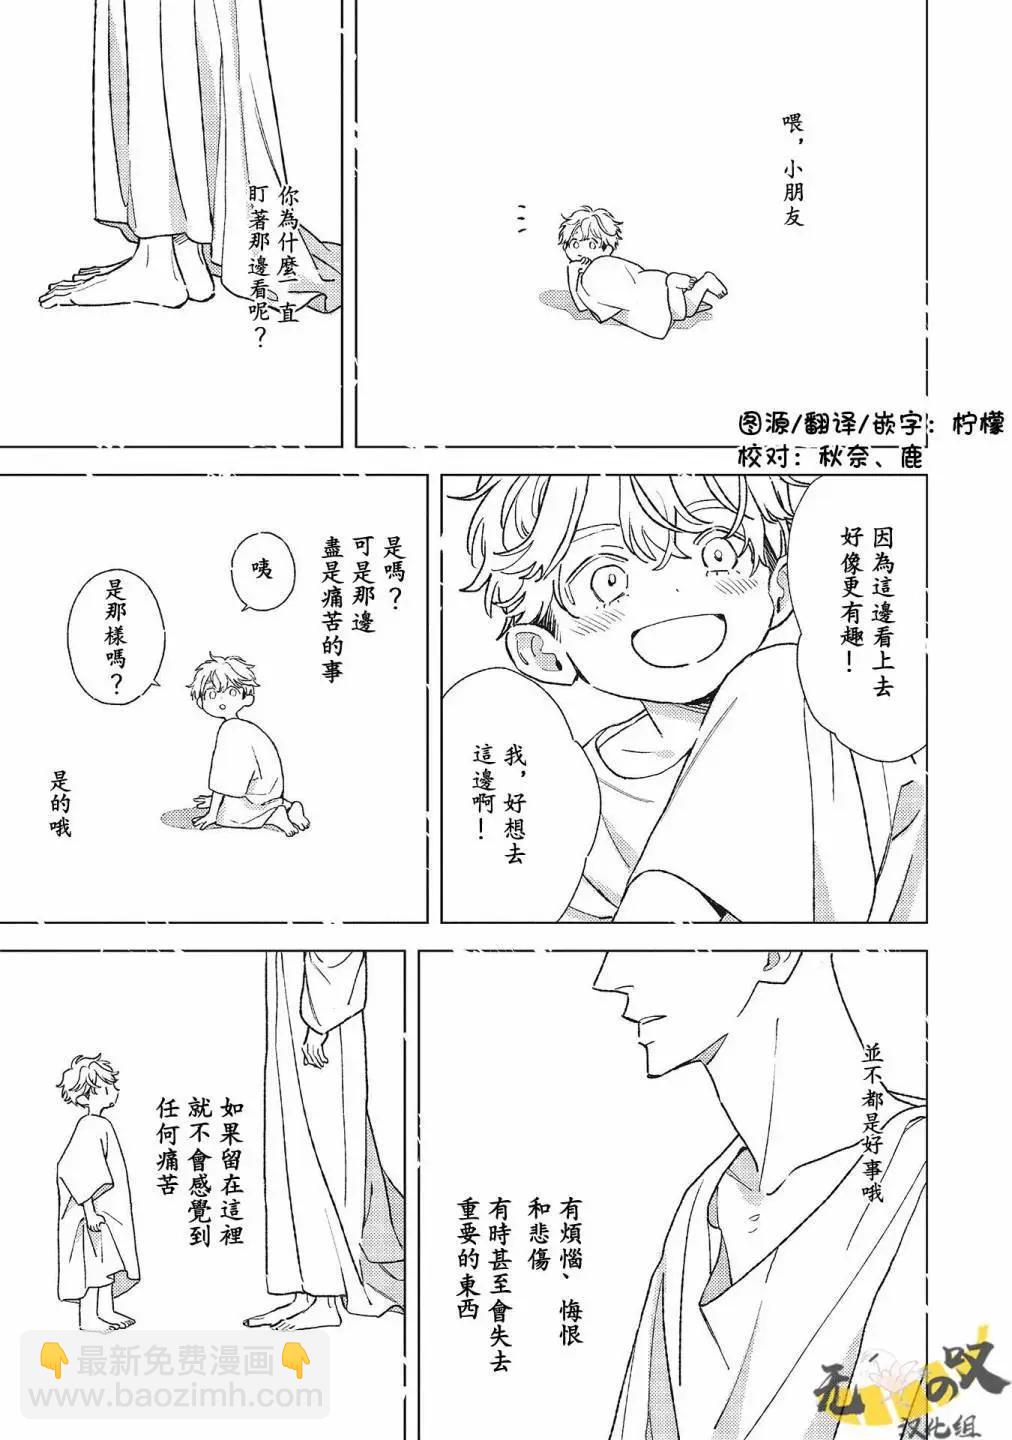 His Little Amber - 第08話 - 3